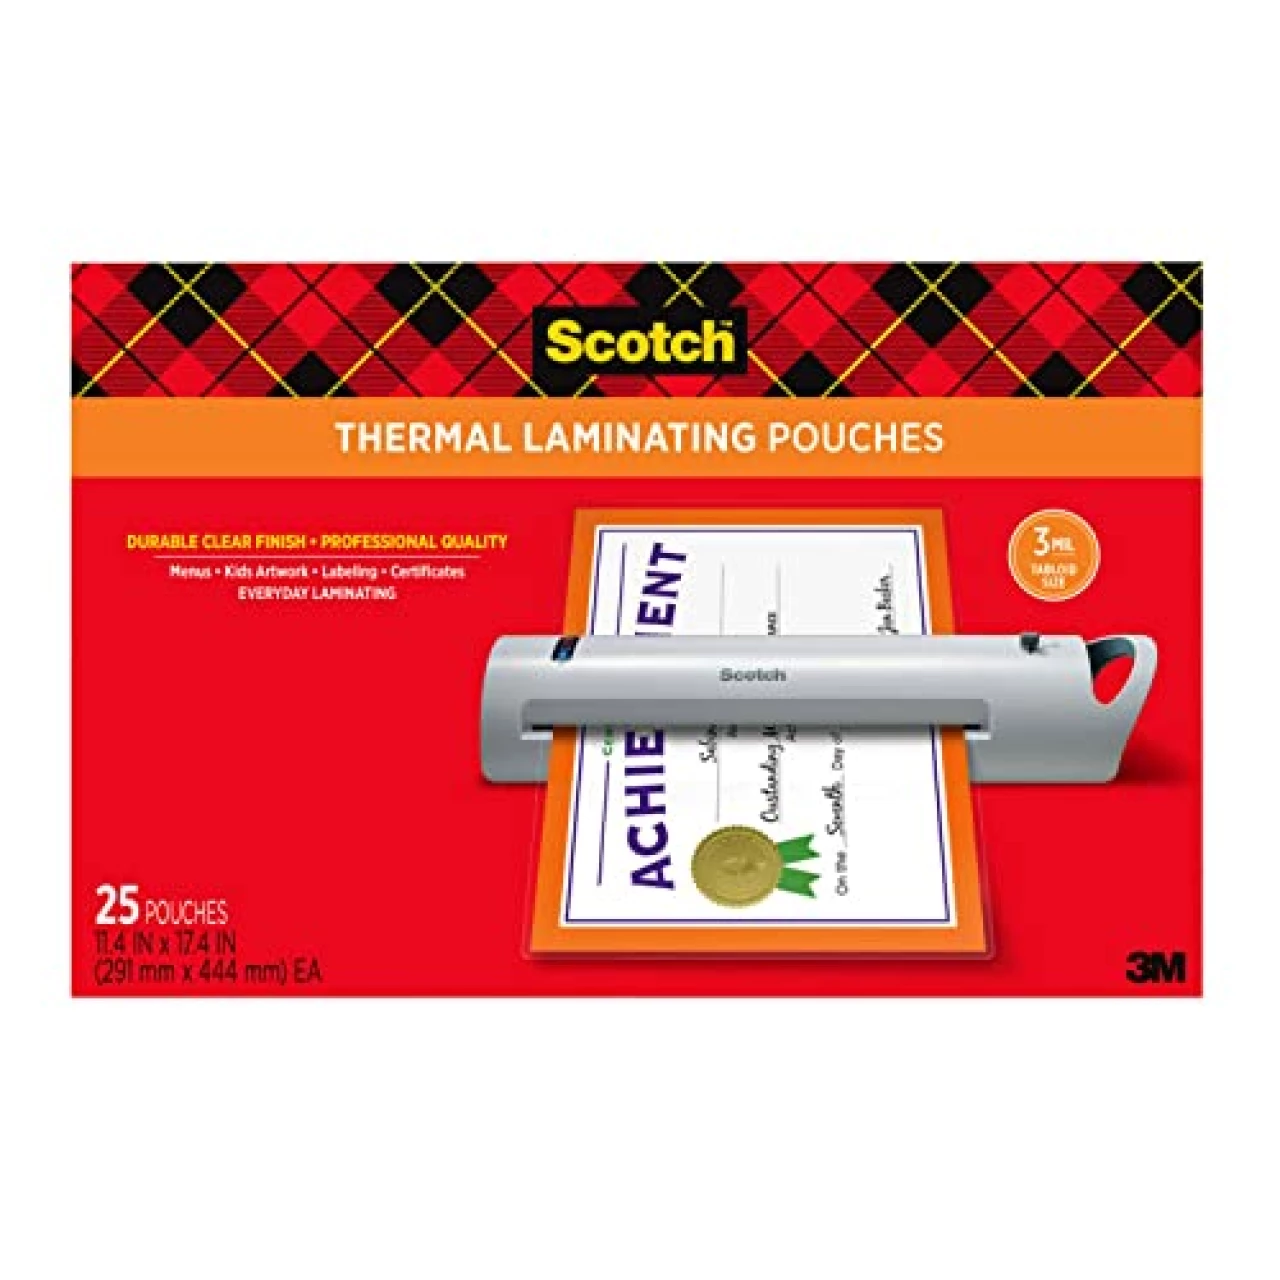 Scotch Thermal Laminating Pouches, 25 Pack Laminating Sheets, 3 Mil, 11 x 17 Inches, Education Supplies &amp; Craft Supplies, For Use With Thermal Laminators, Legal Size Sheets (TP3856-25)